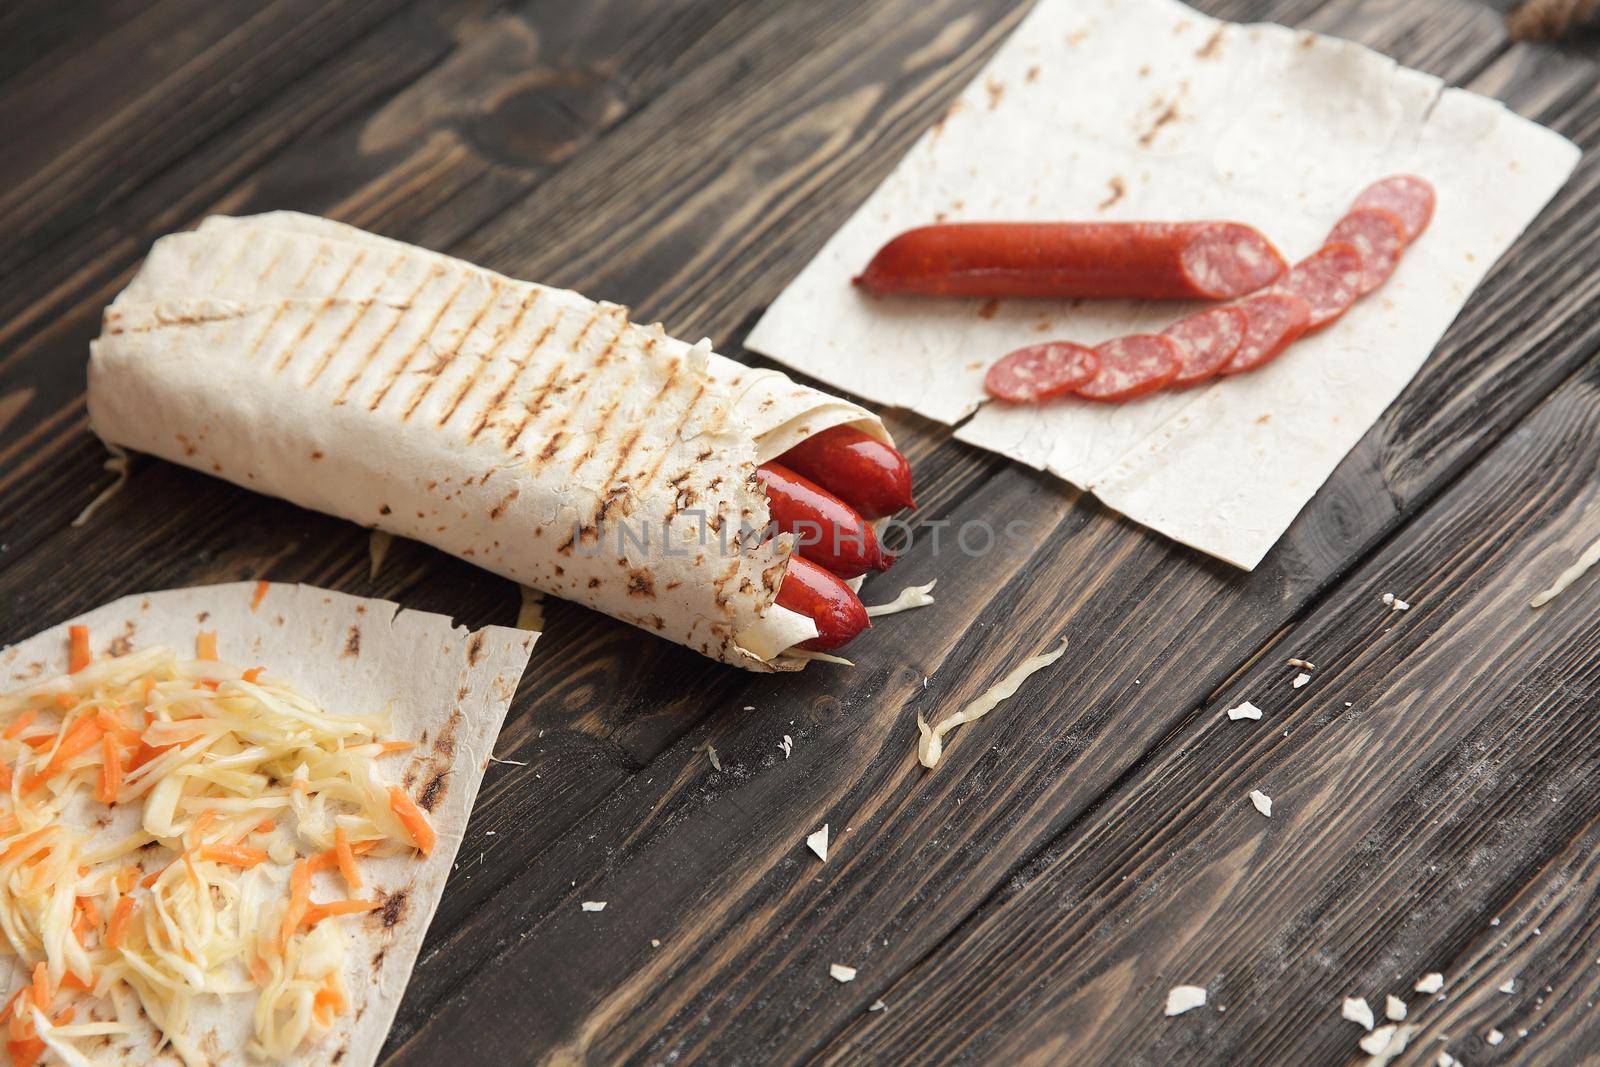 sausages in pita bread on wooden background.